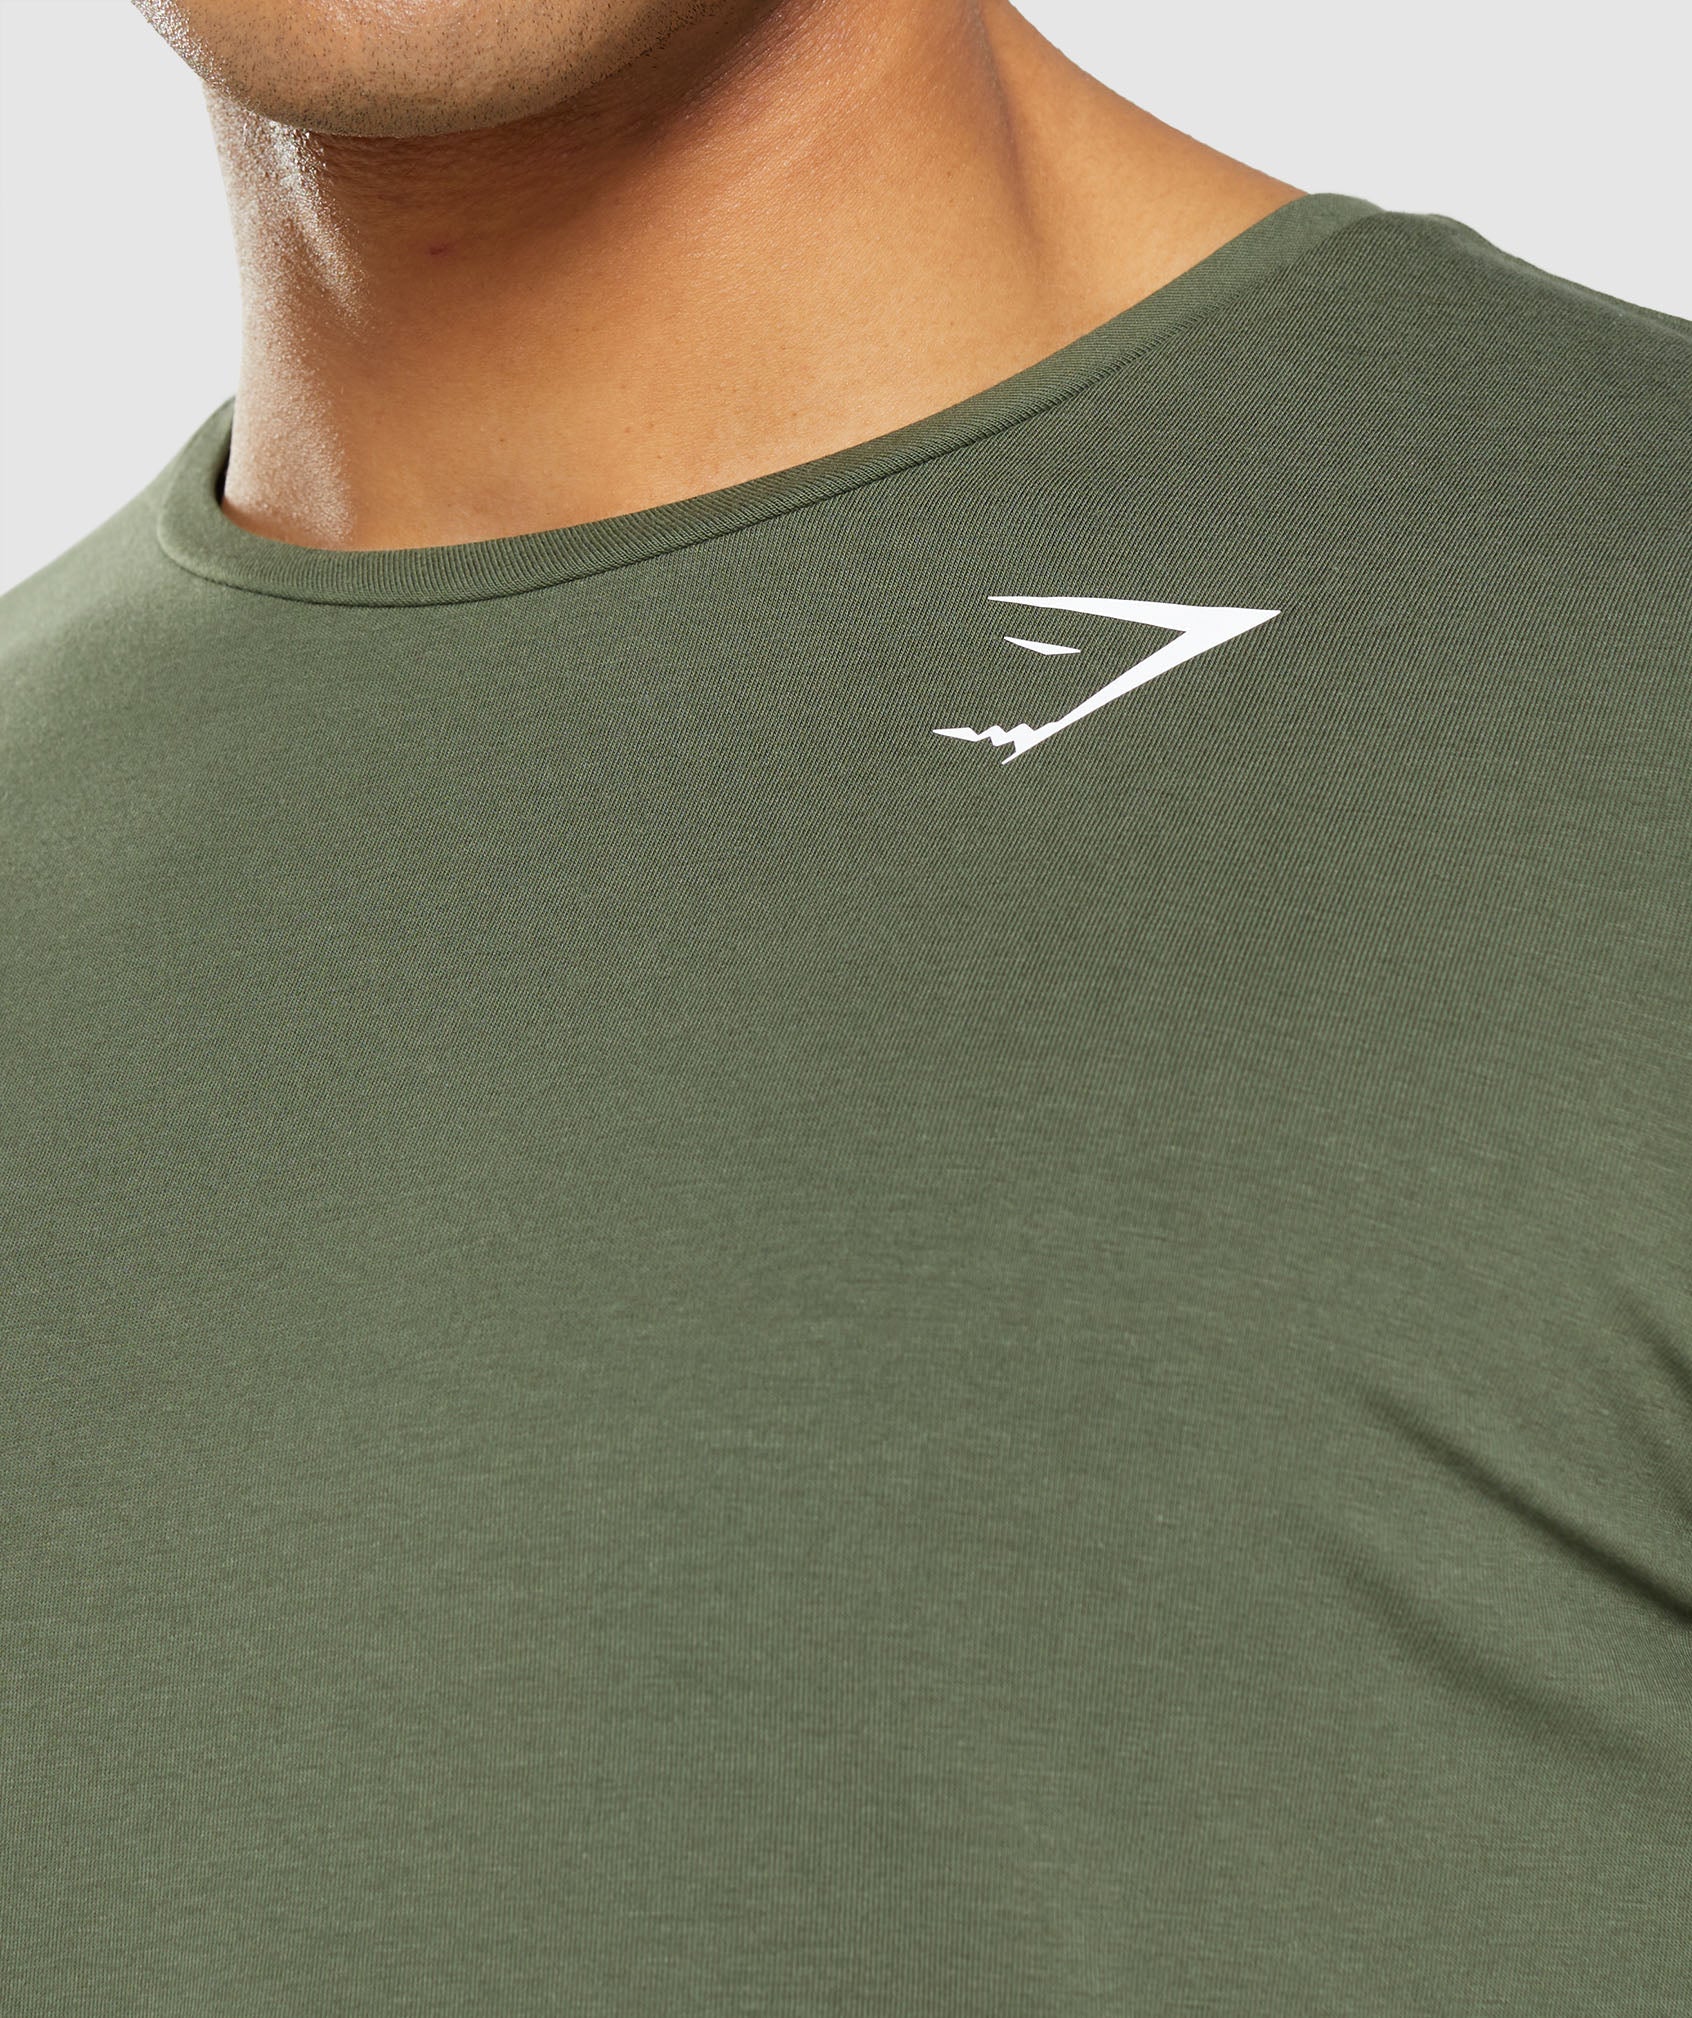 Essential T-Shirt in Core Olive - view 5